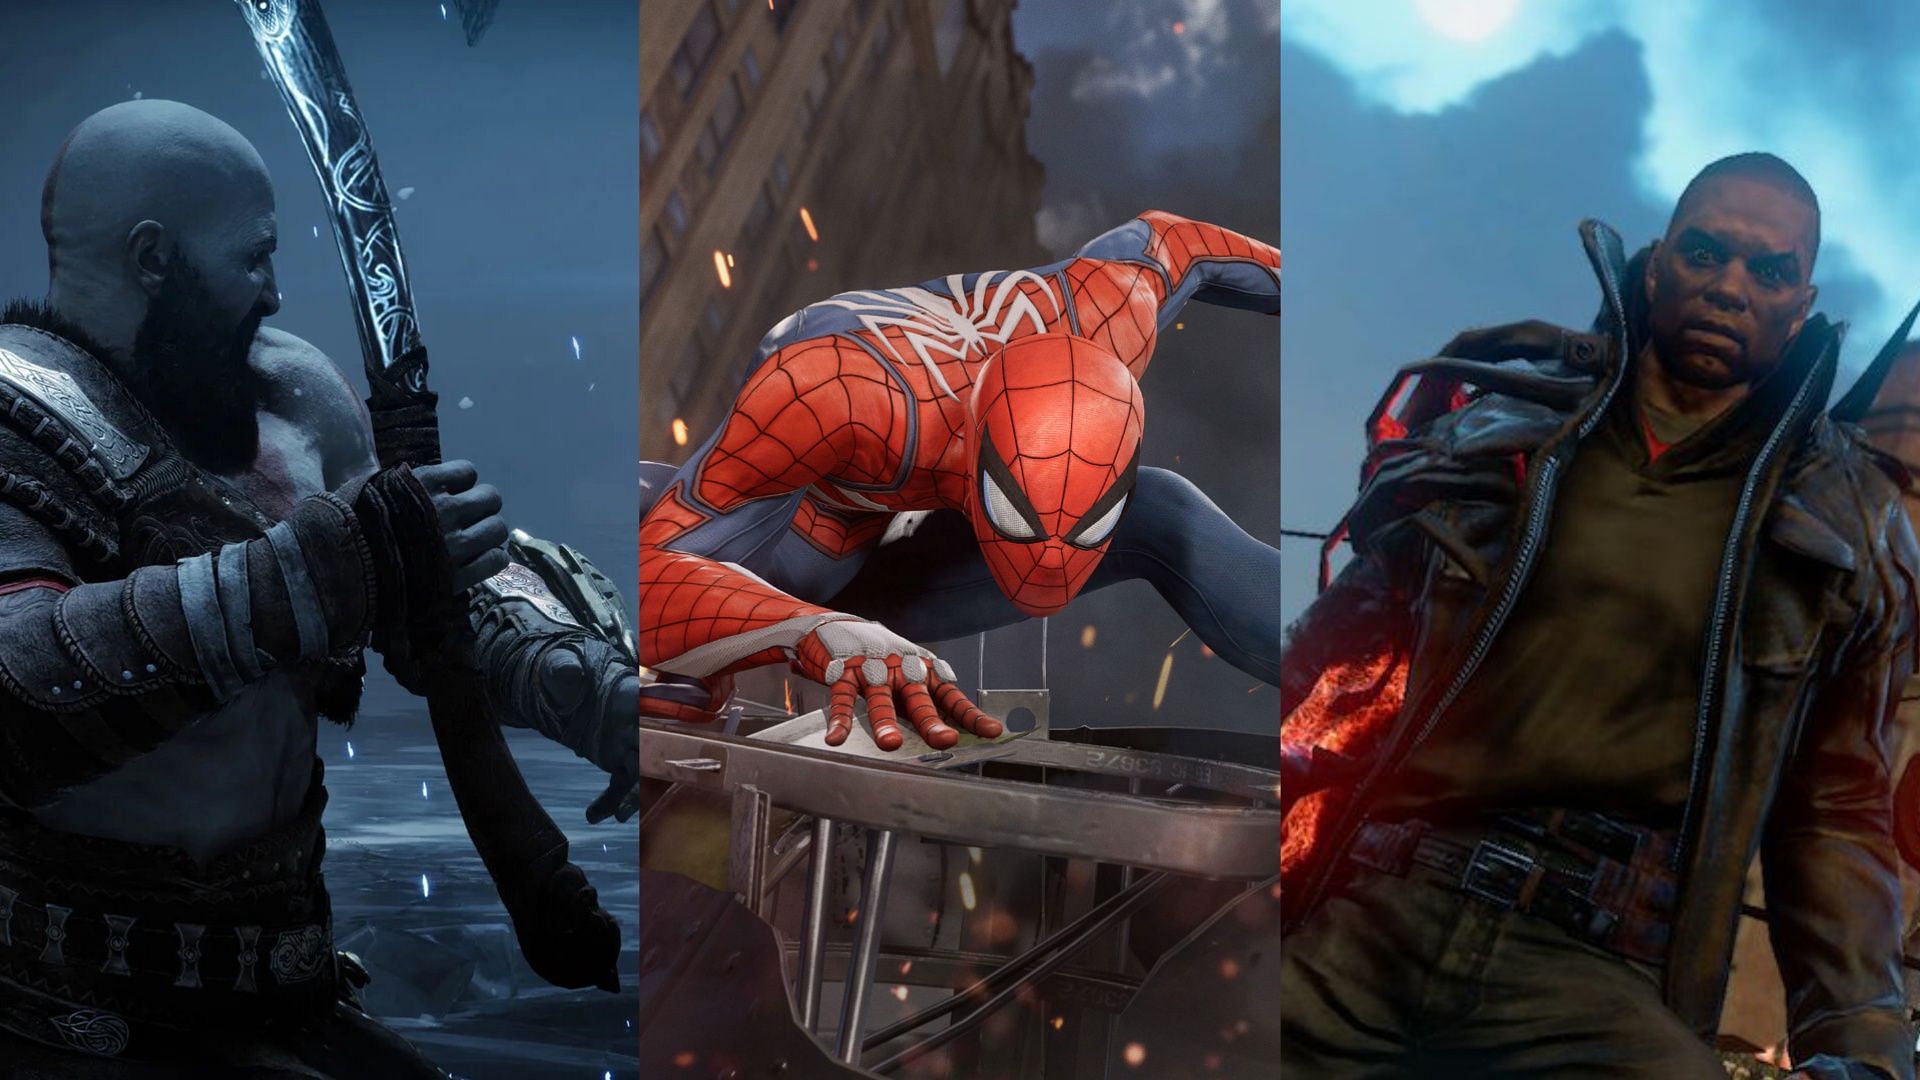 These games provides a superhero gameplay experience like Marvel